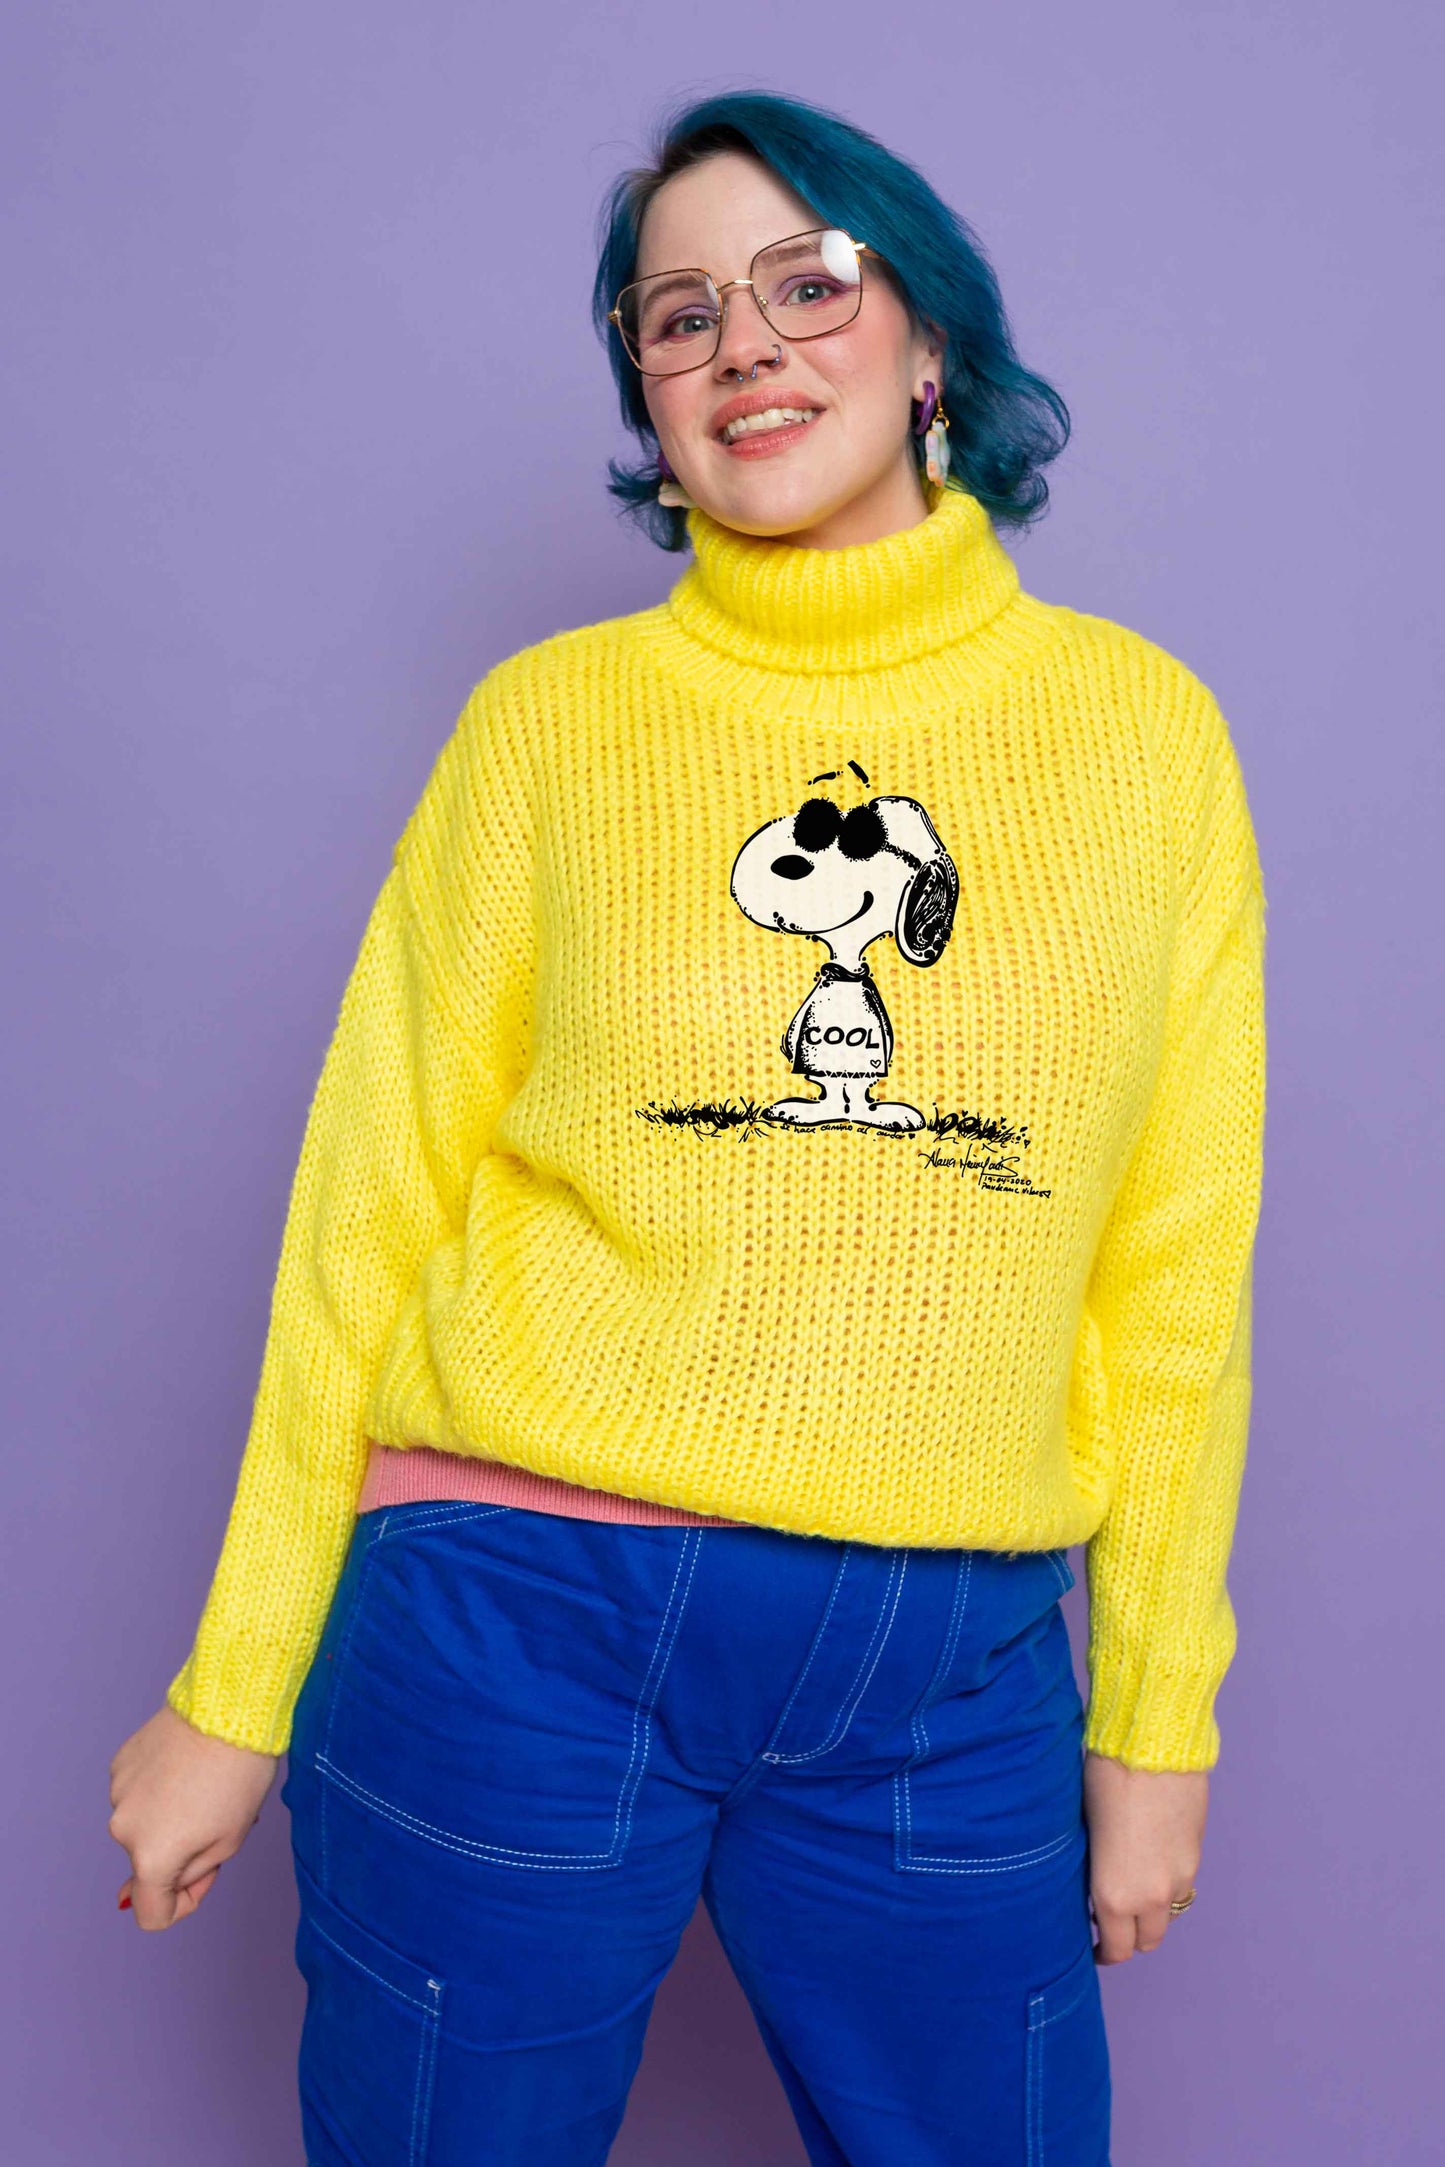 This is The Remix High Neck Jumper THE PATH IS MADE BY WALKING (Inspired by Snoopy) - High Neck Chunky Knit Jumper In Yellow